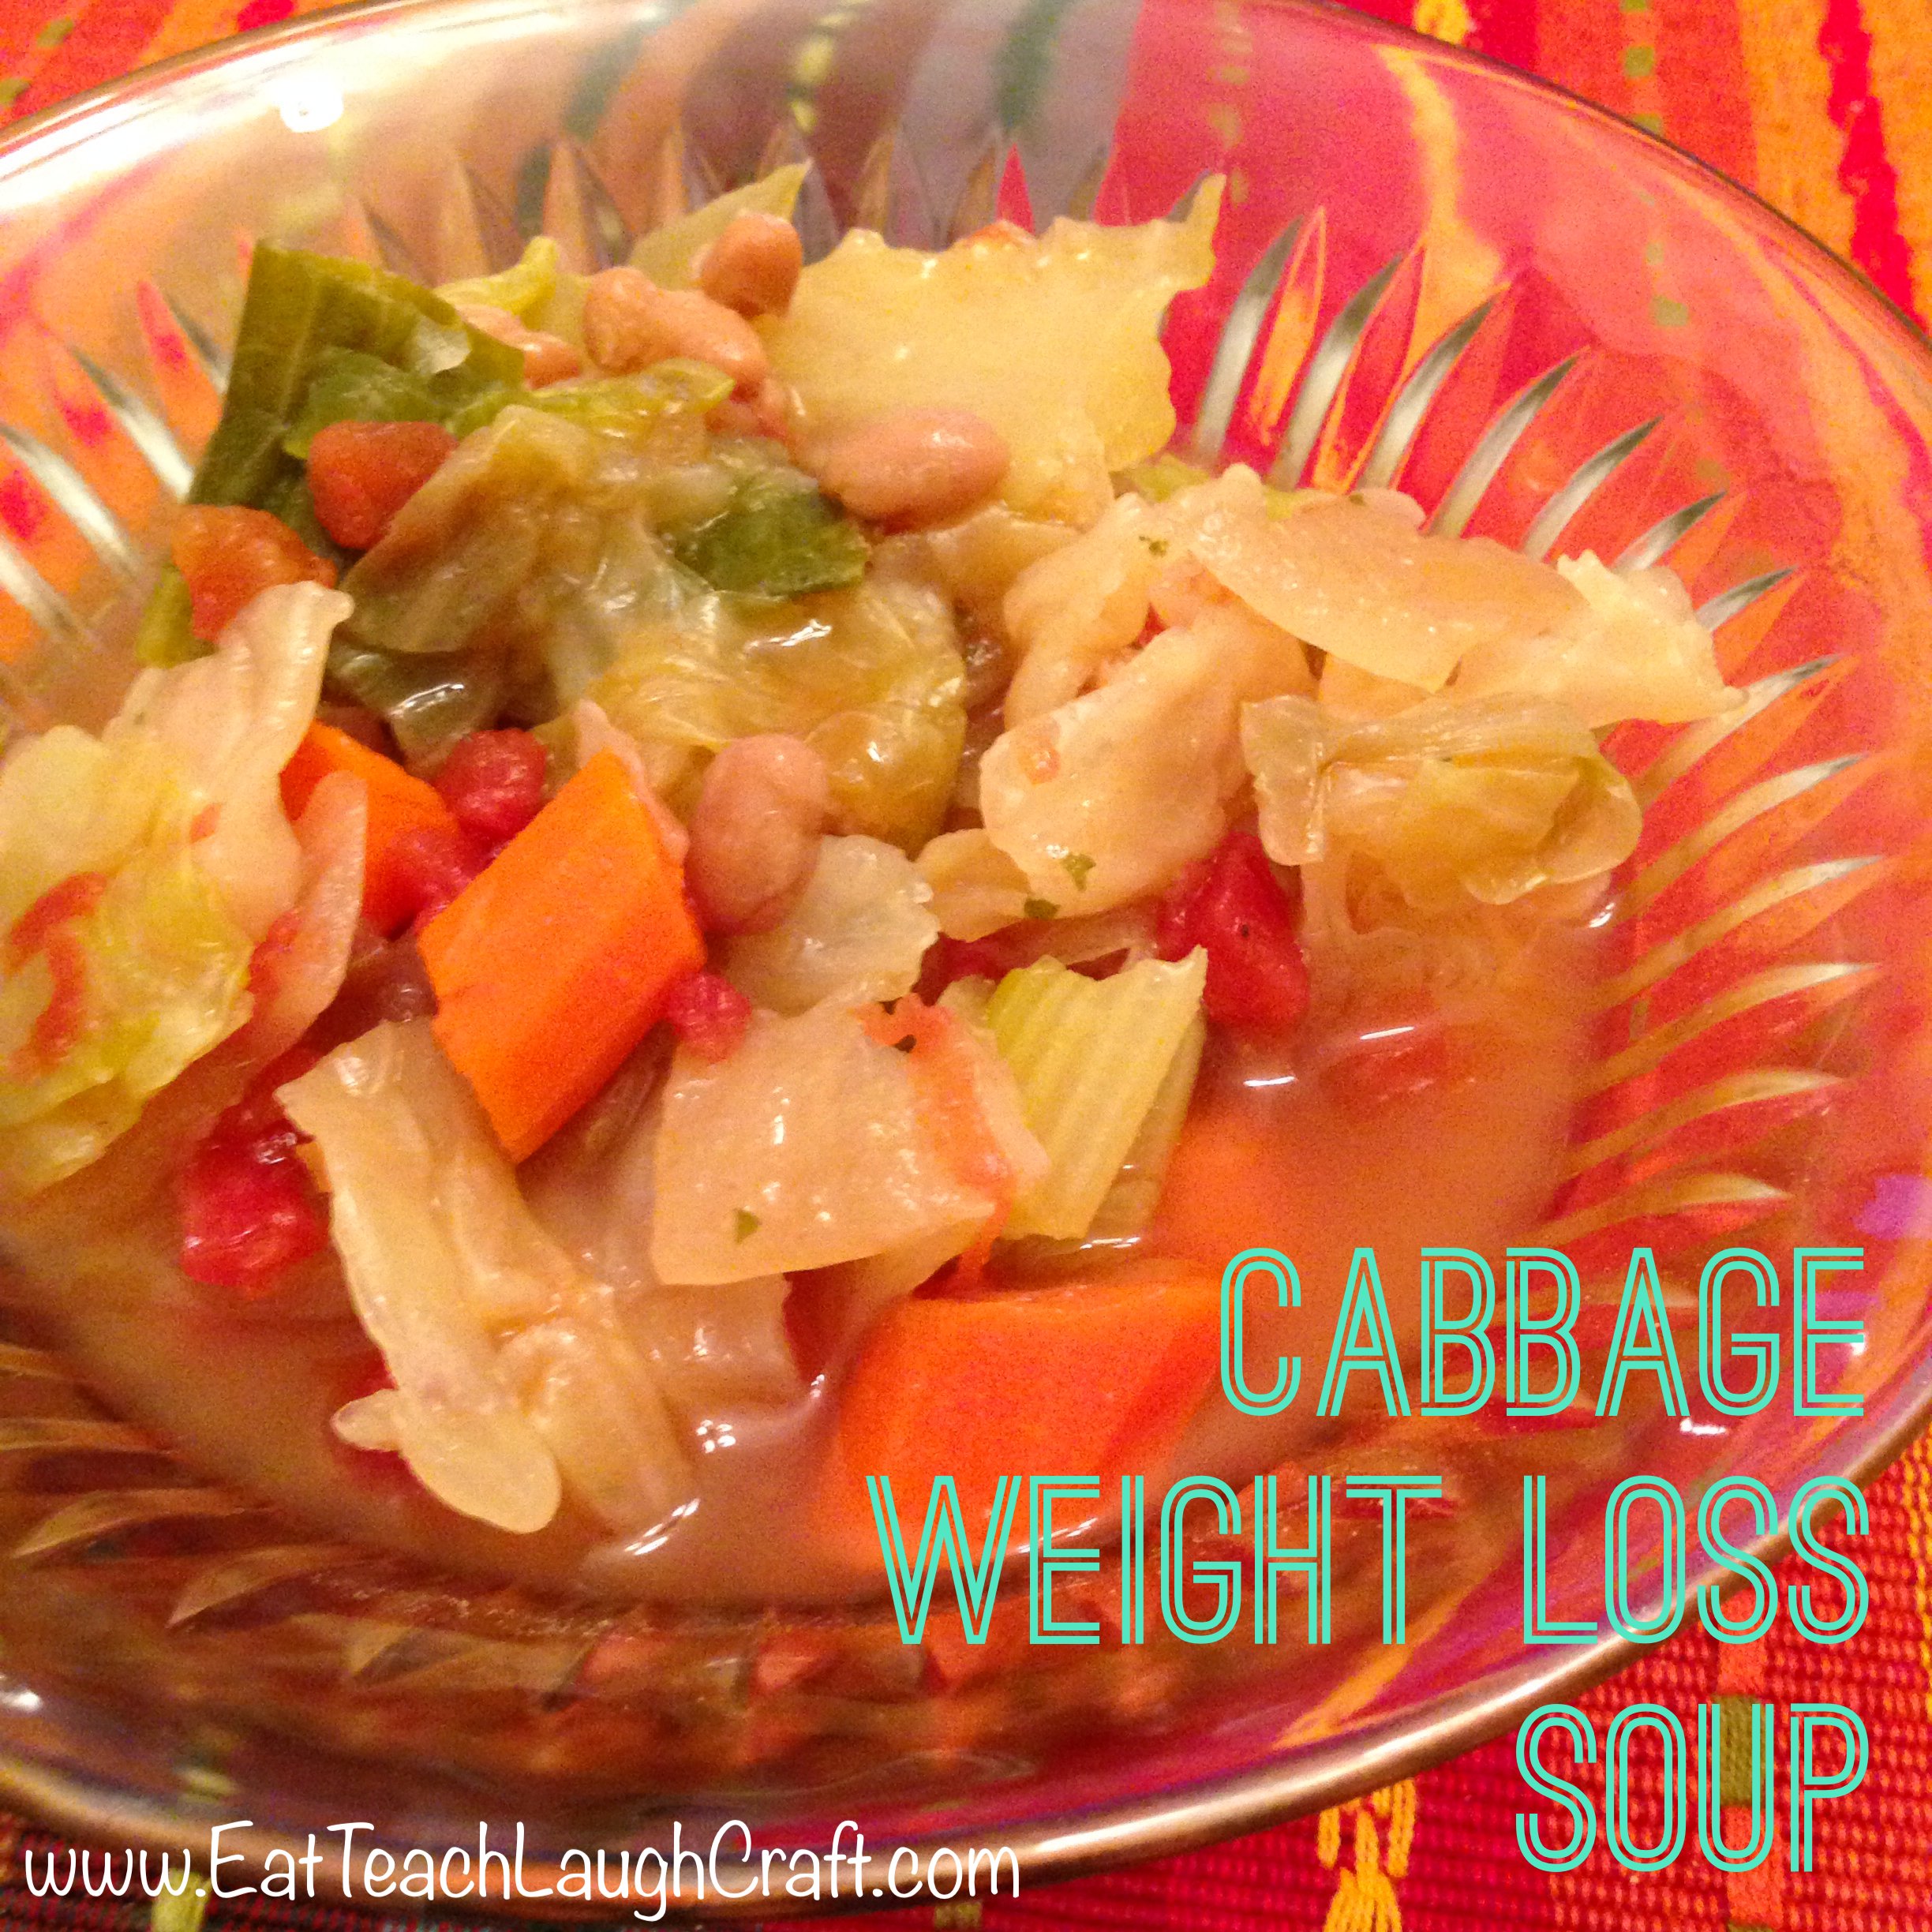 Cabbage Weight Loss Soup Recipe